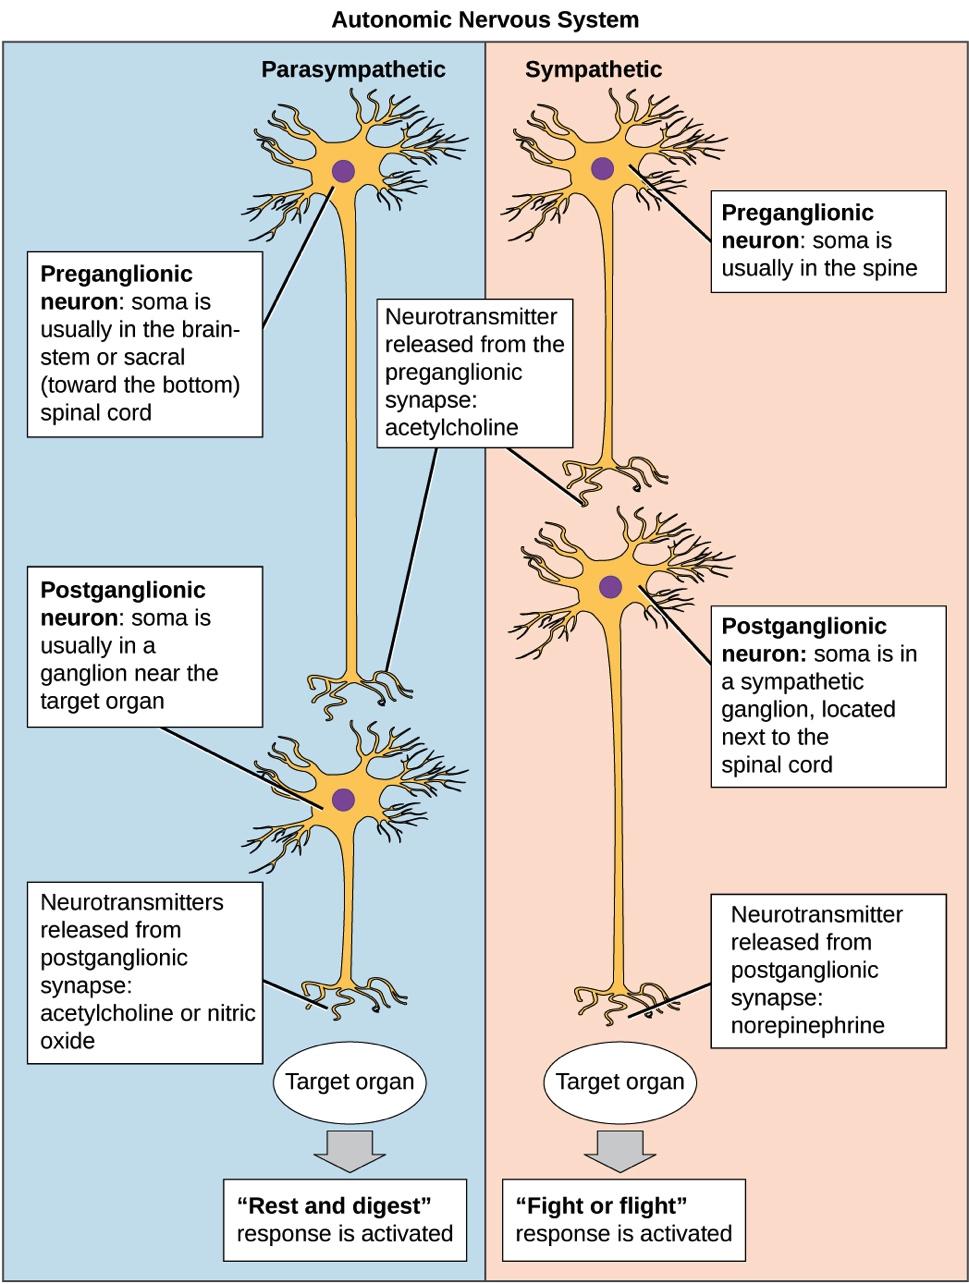 Nervous System Autonomic Nervous System A subset of the peripheral nervous system that helps control body functions without conscious thought In the autonomic nervous system, a preganglionic neuron